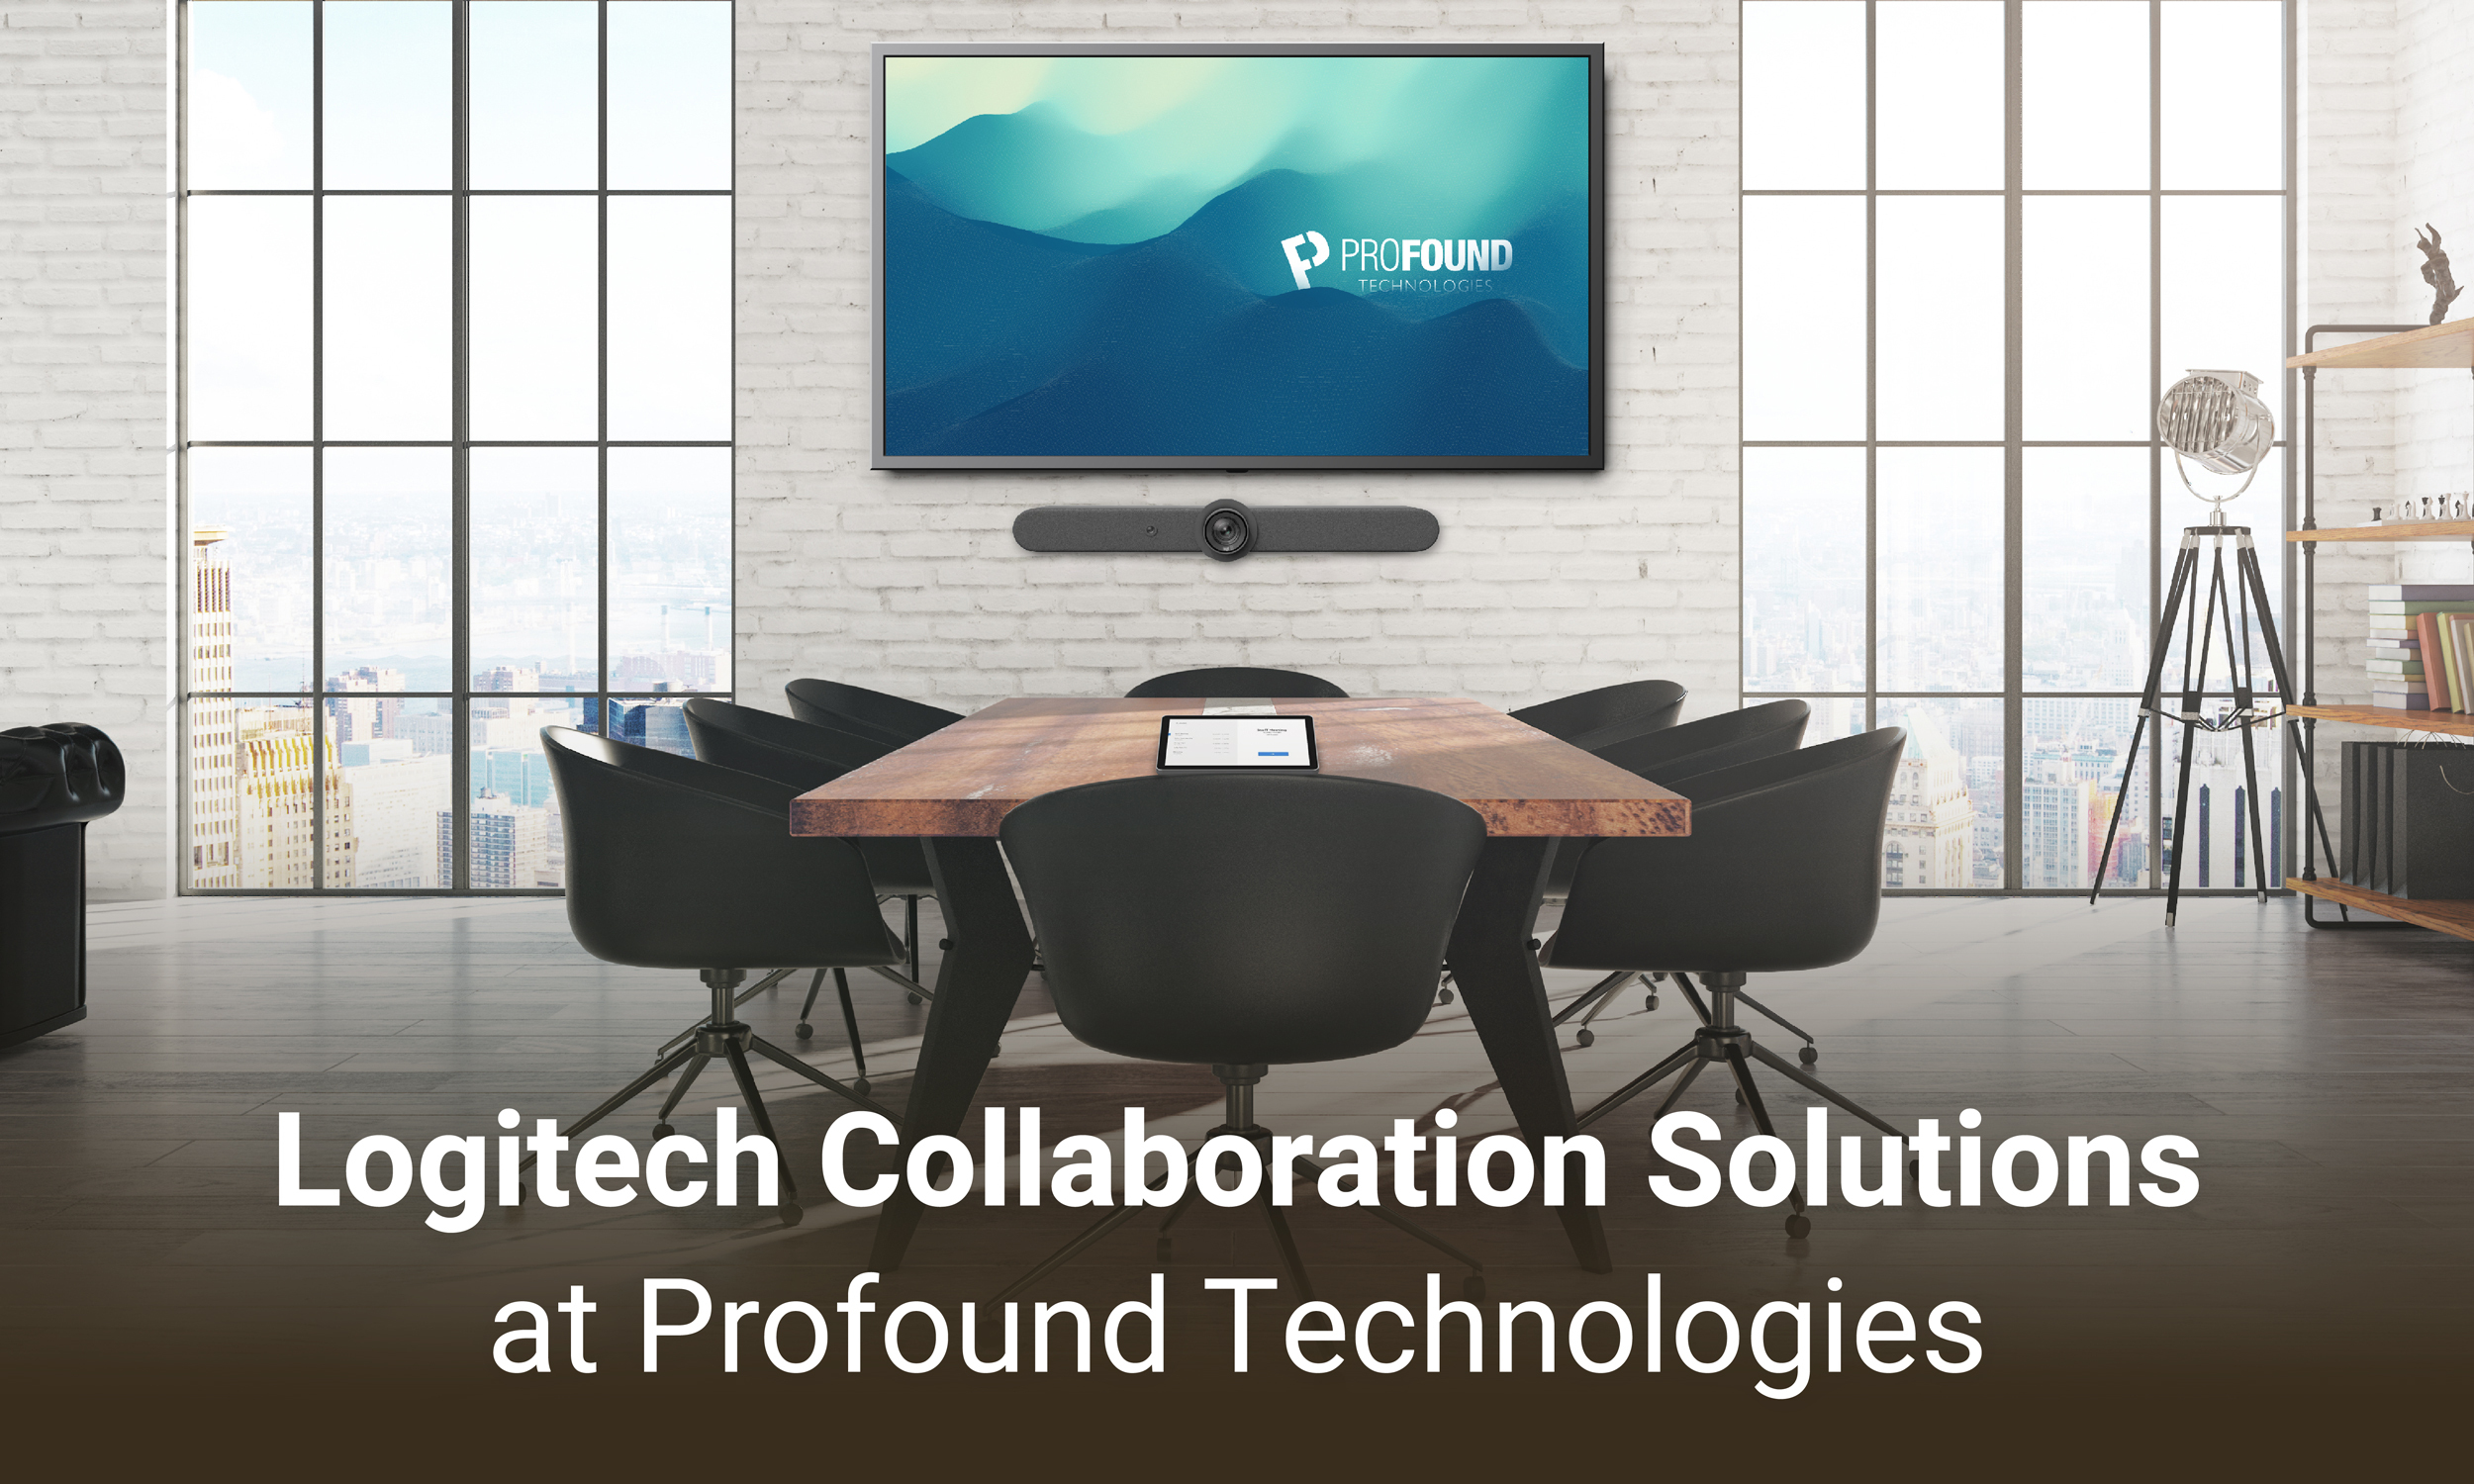 Logitech Collaboration Solutions at Profound Technologies